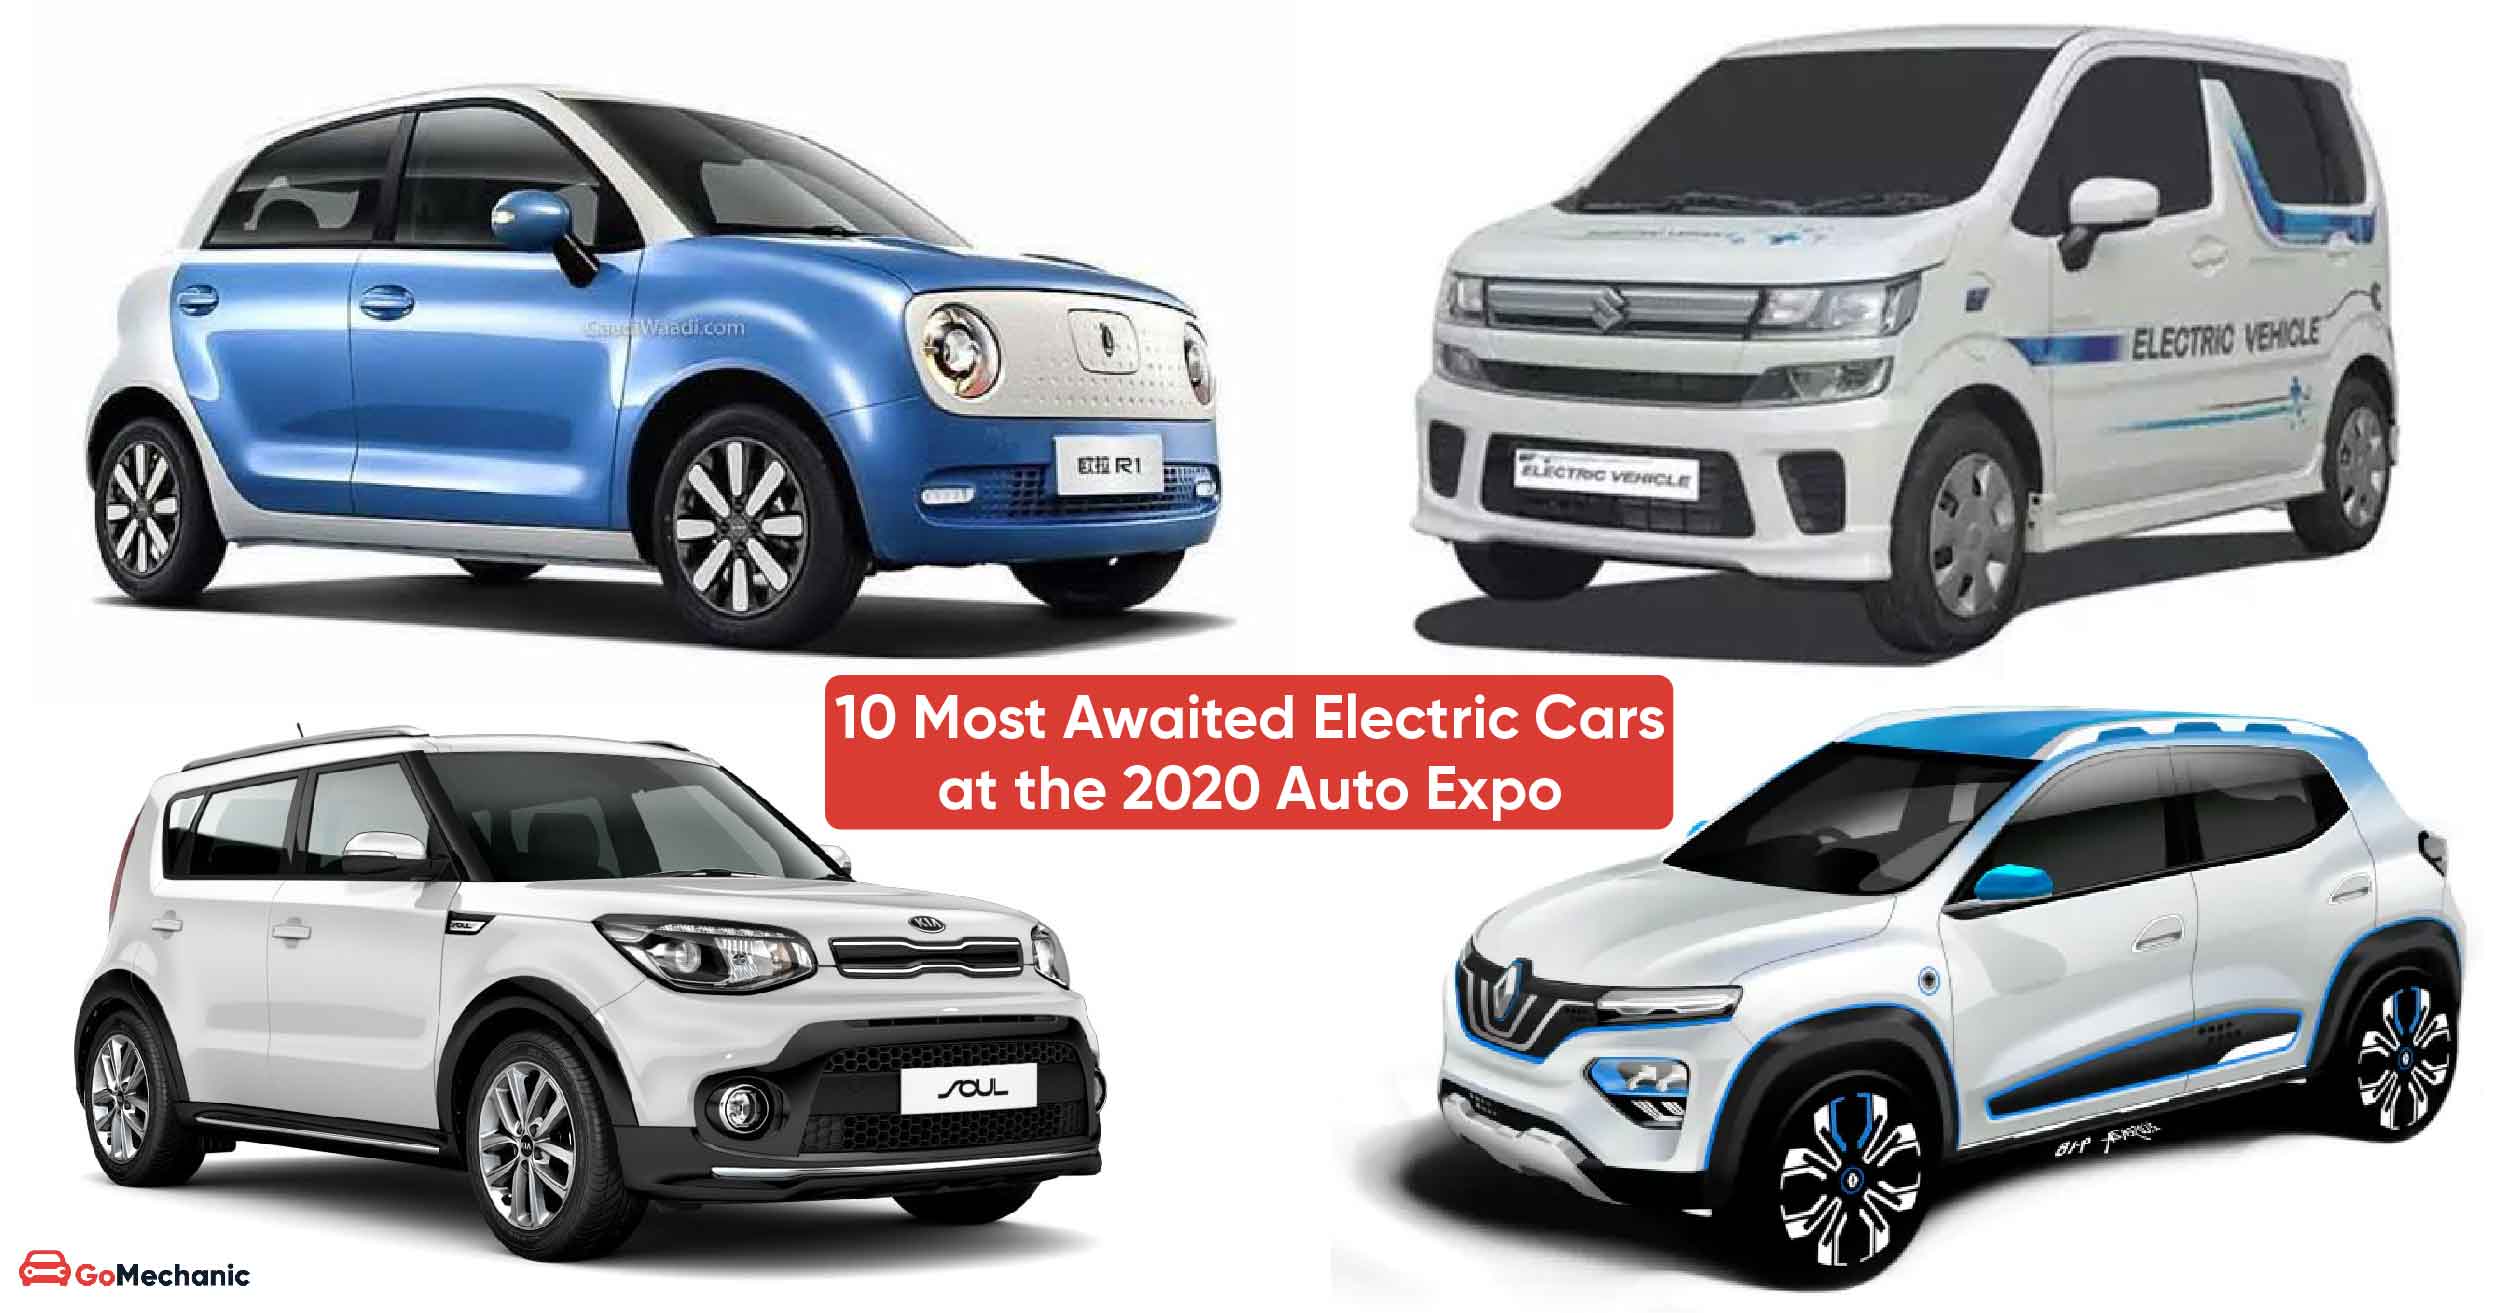 12 Most Awaited Electric Vehicles To Check Out at Auto Expo 2020